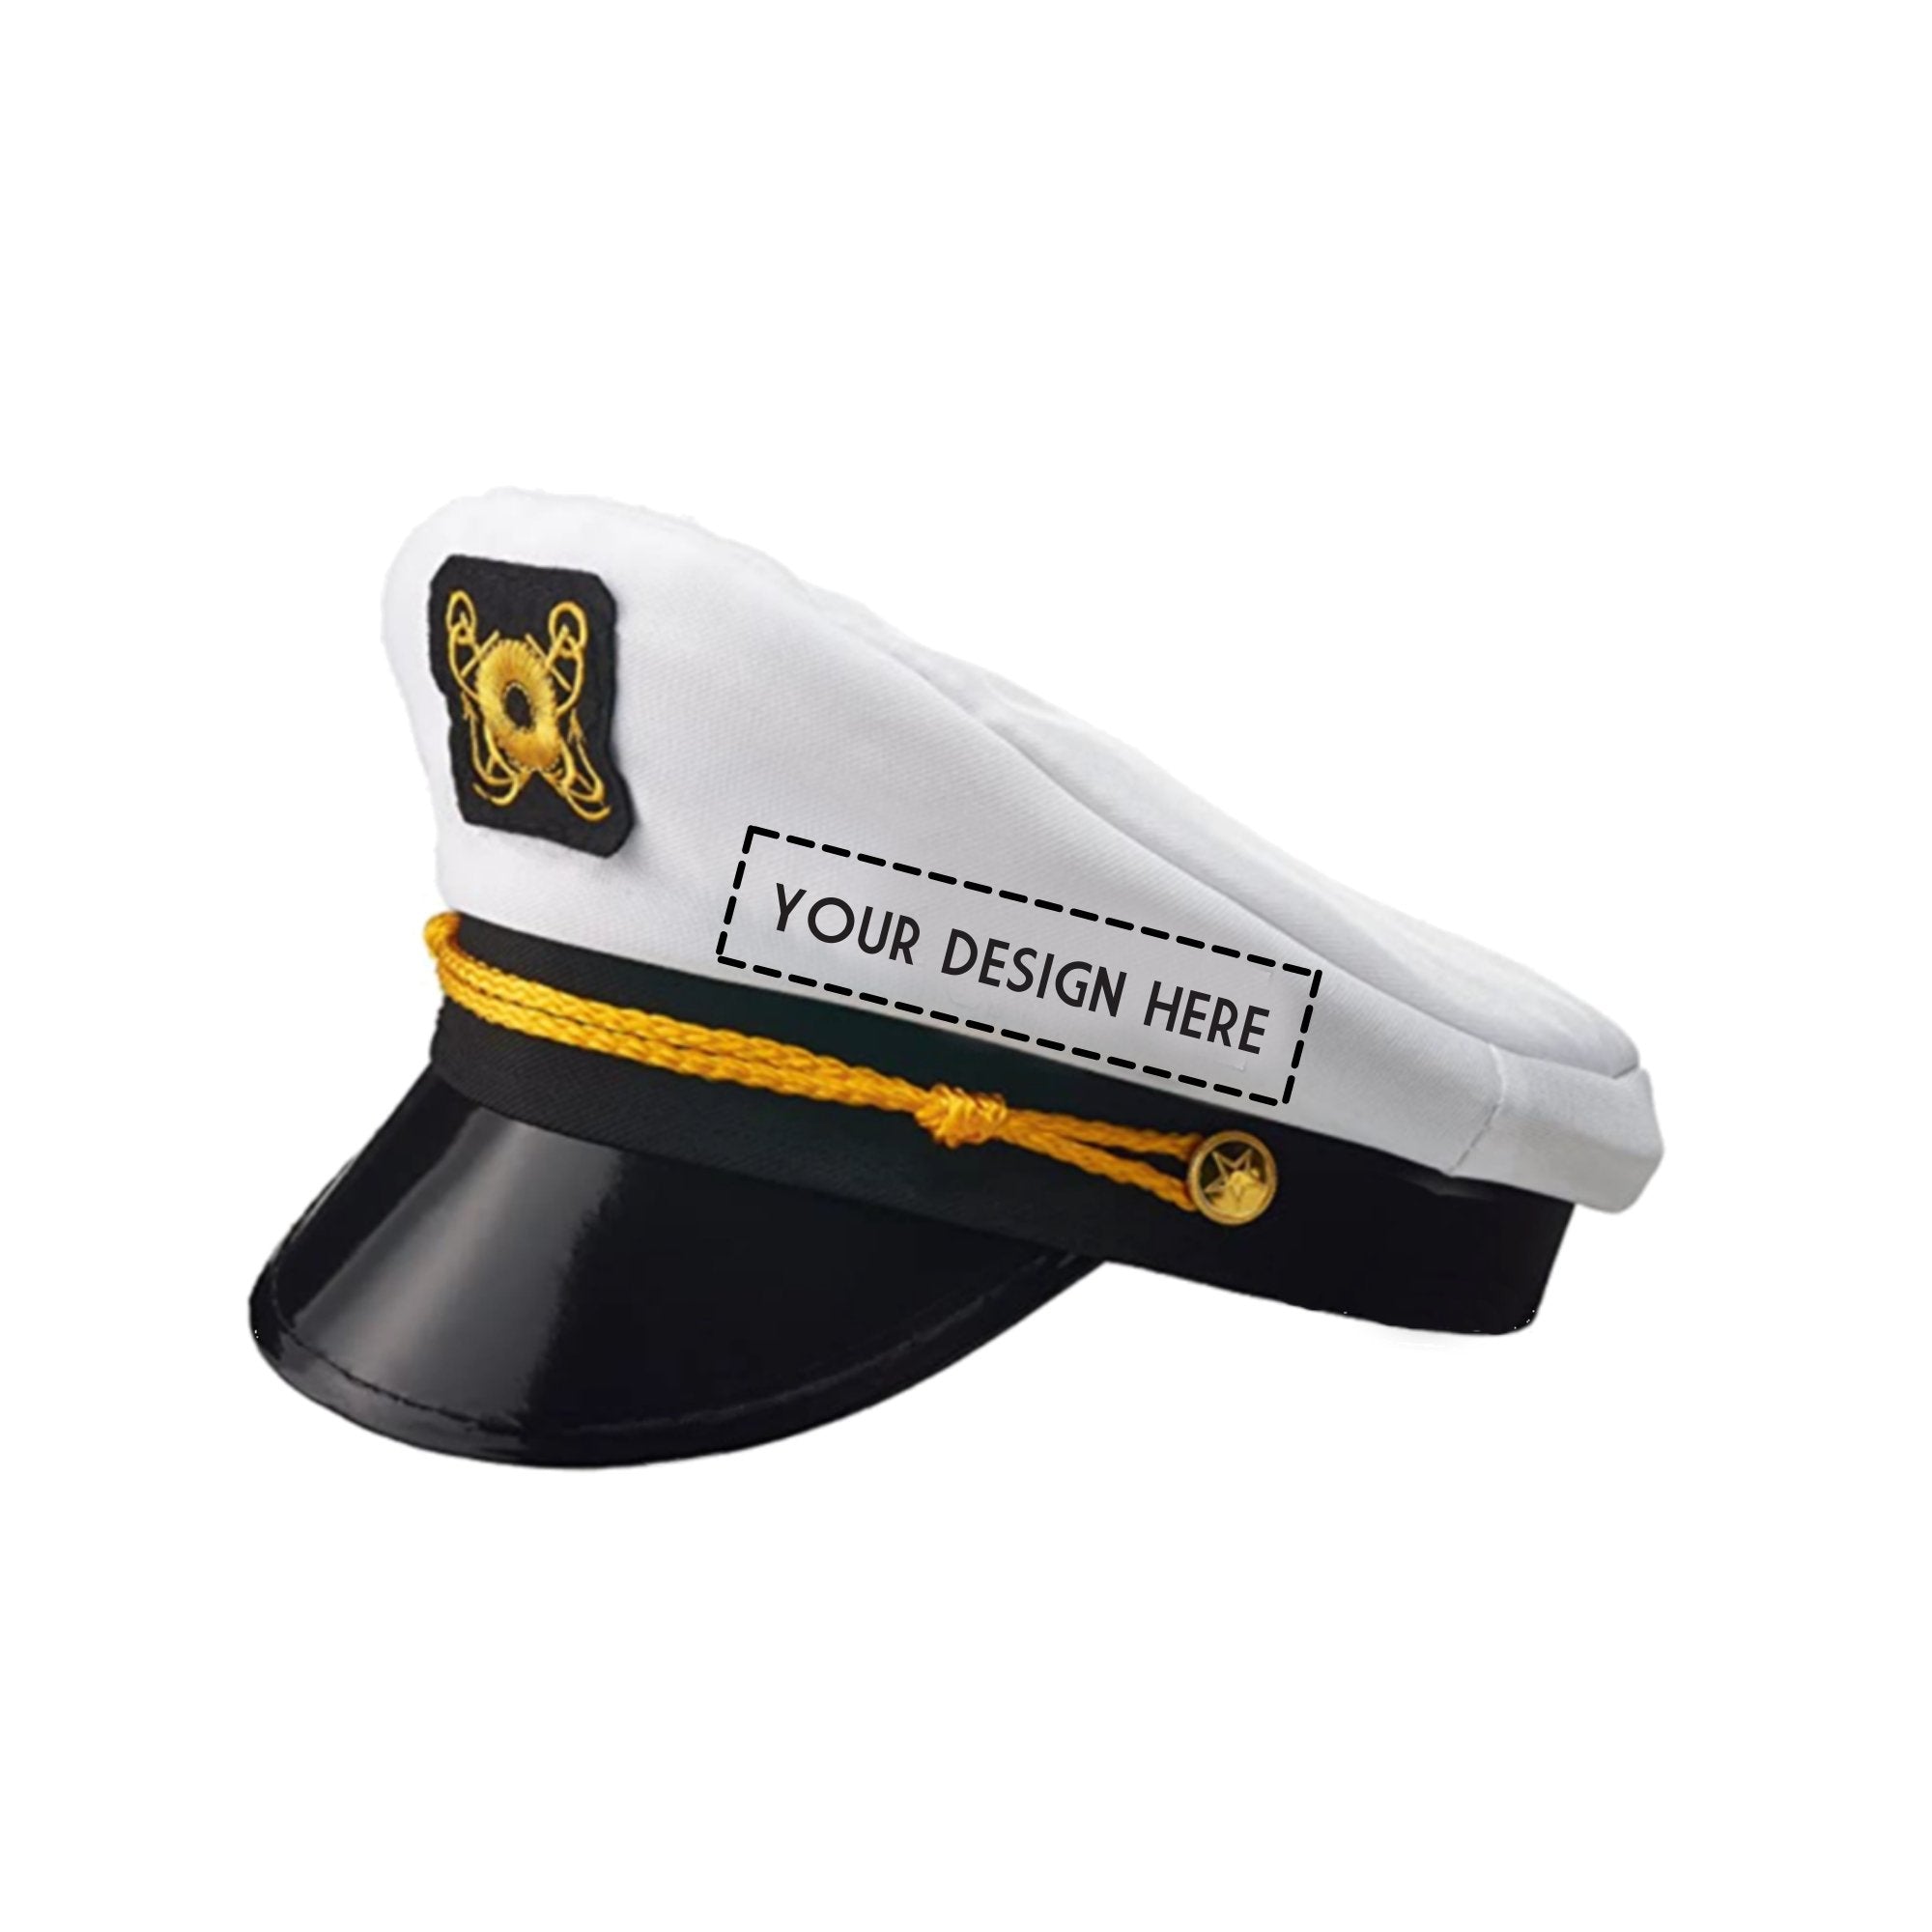 A captain's hat that can be customized on the side